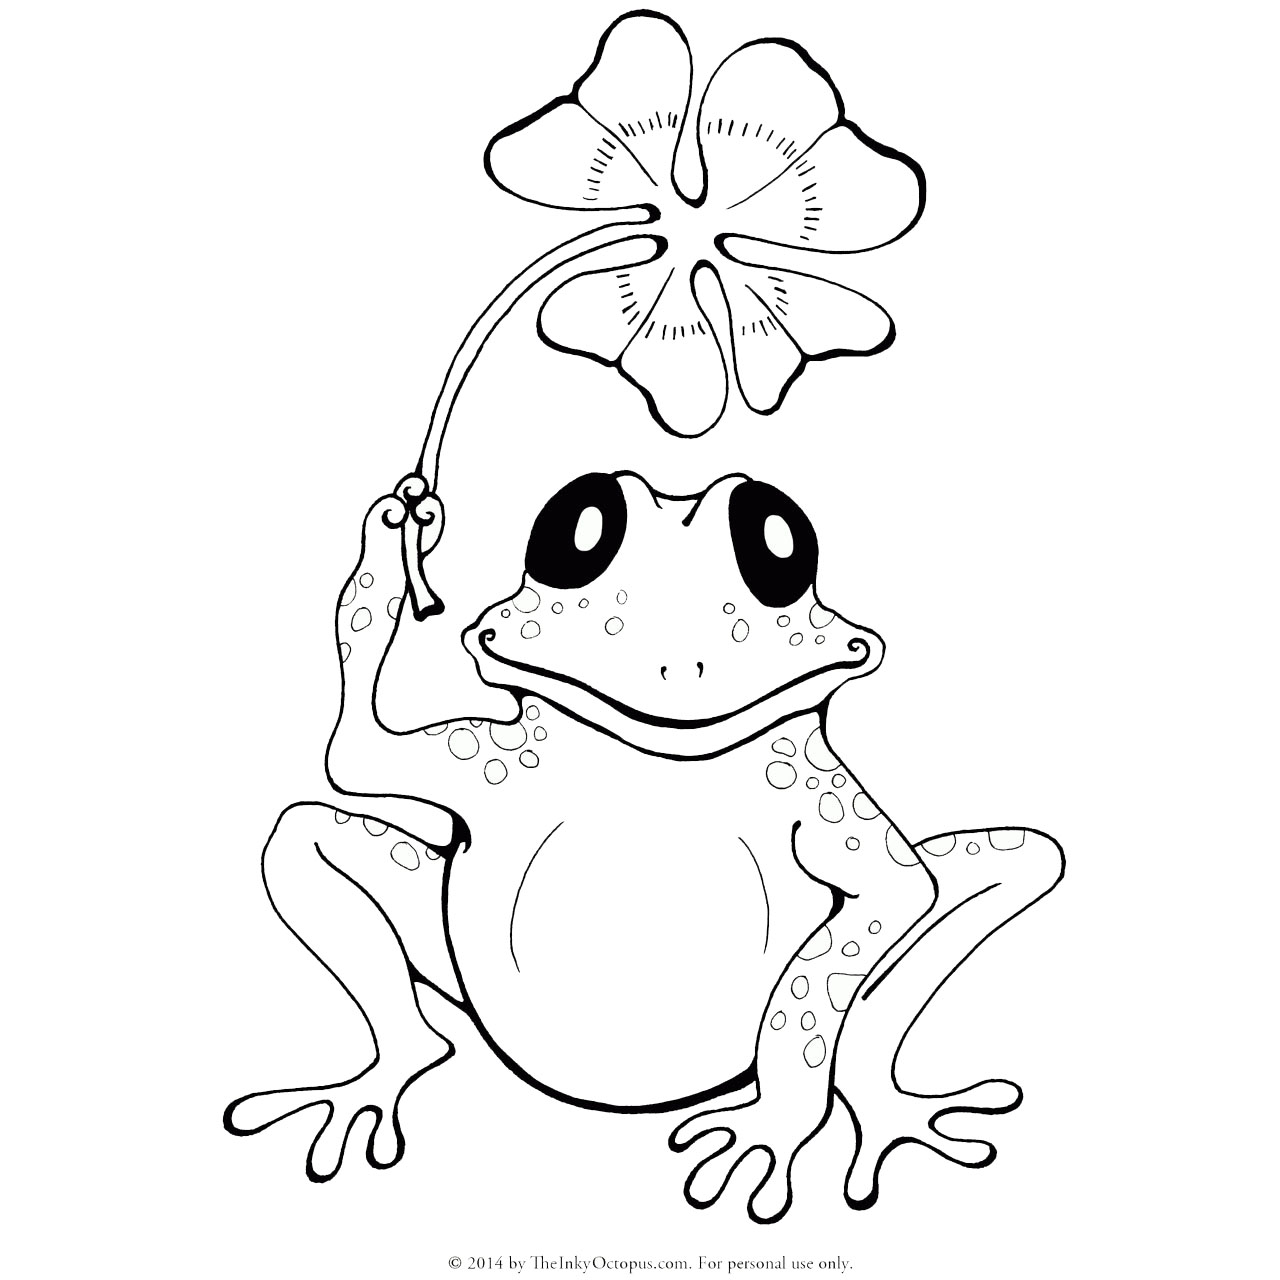 Free 4 Leaf Clover Coloring Pages with Frog printable